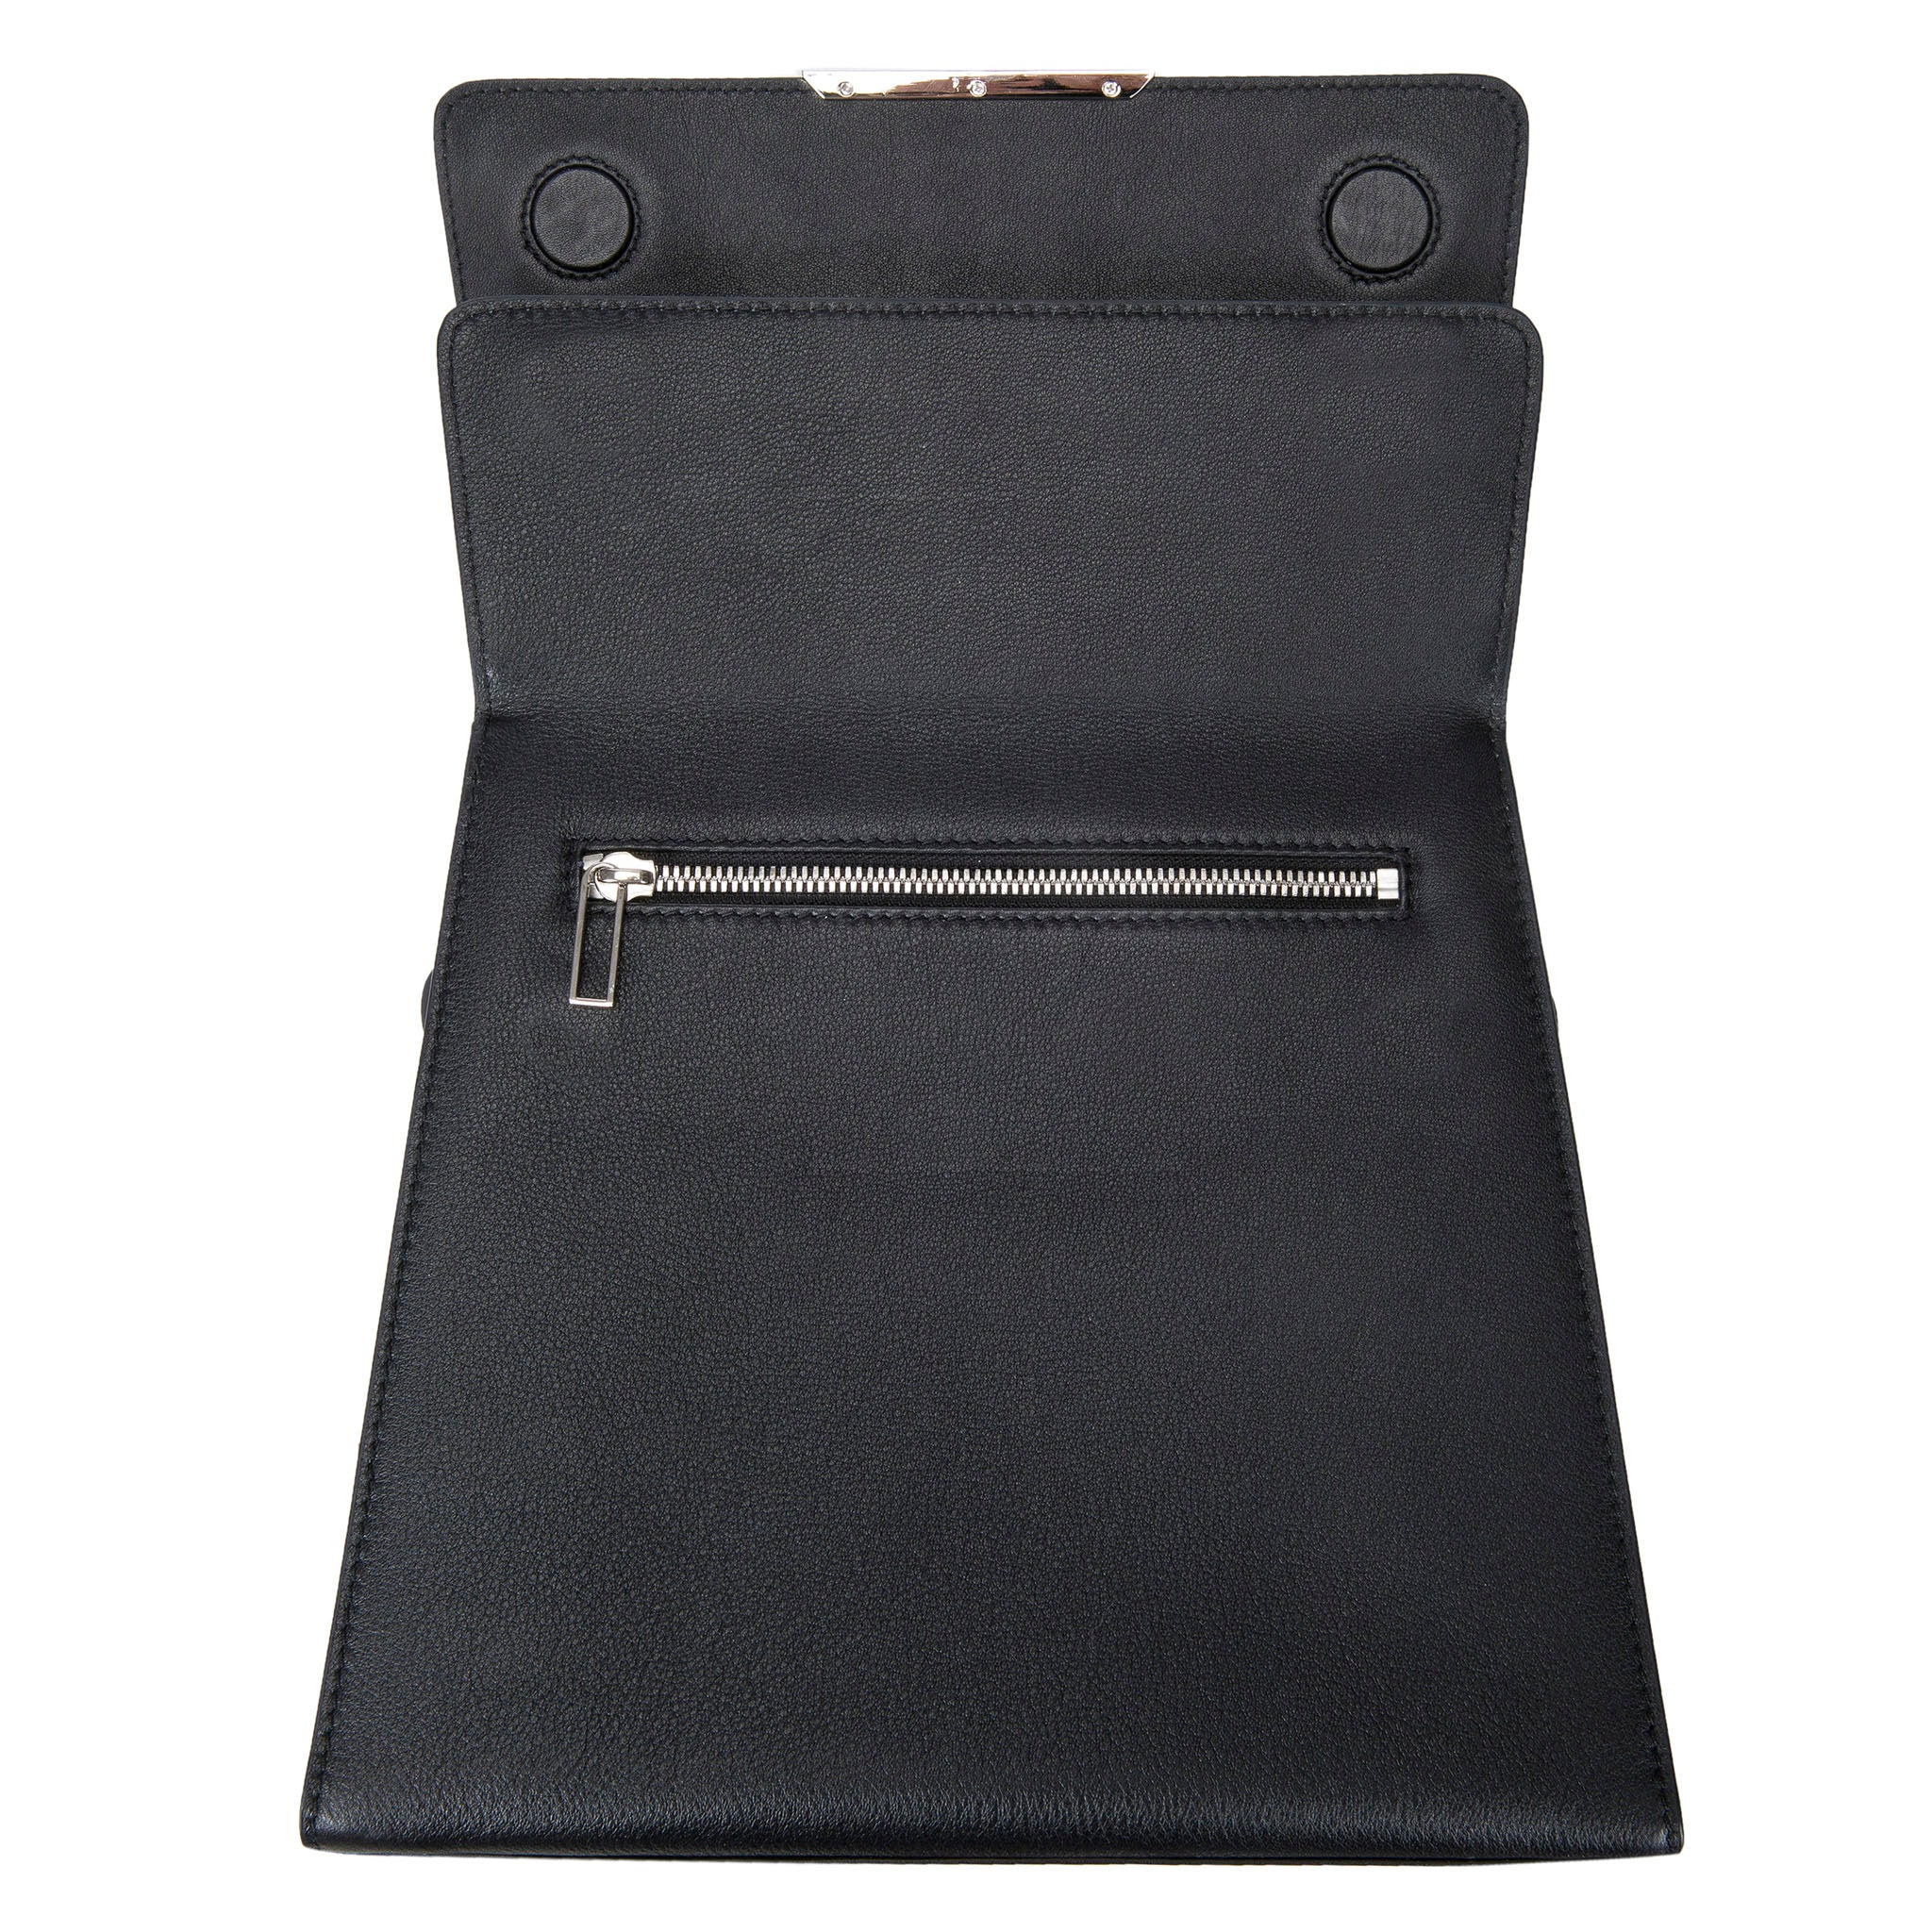 Modern Classic Crossbody Bag Black Shagreen Top And Black Leather Body Front Open View Jacq - Vivo Direct 